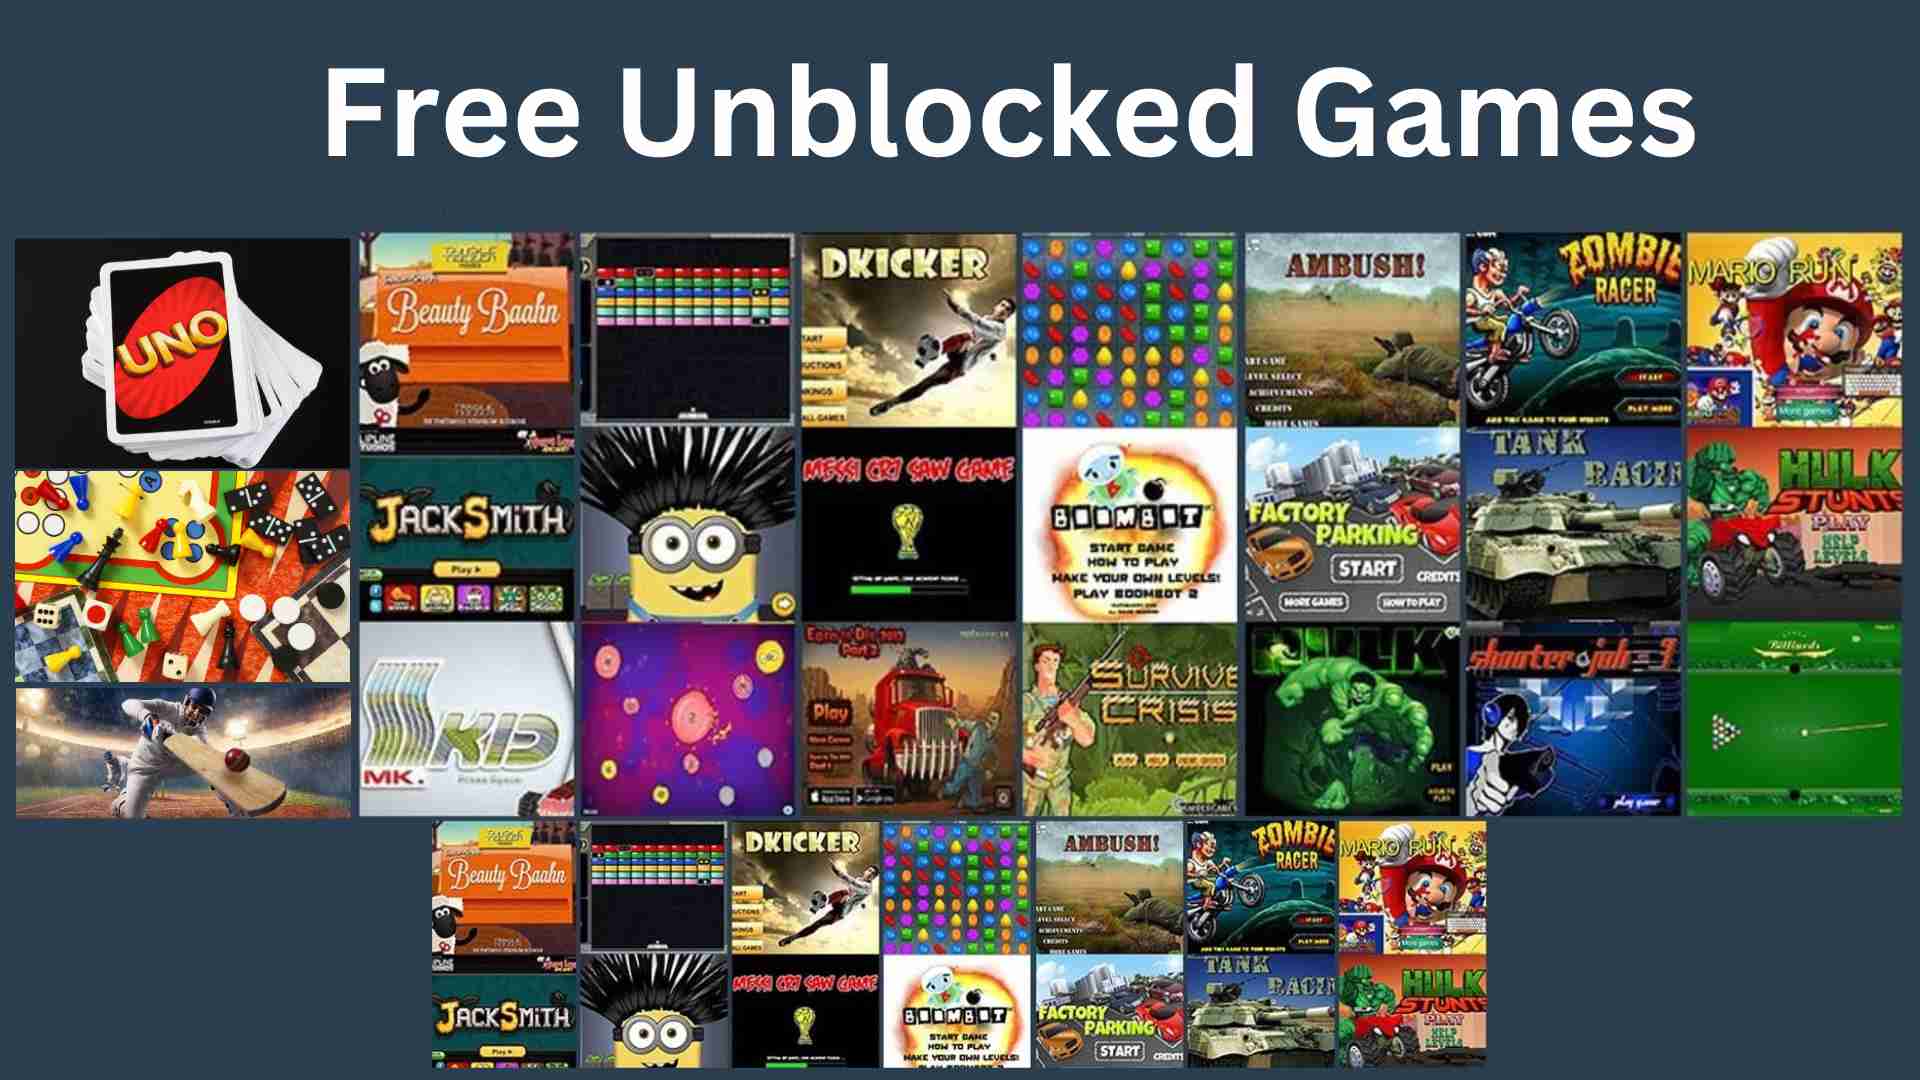 Unblocked Games for Free